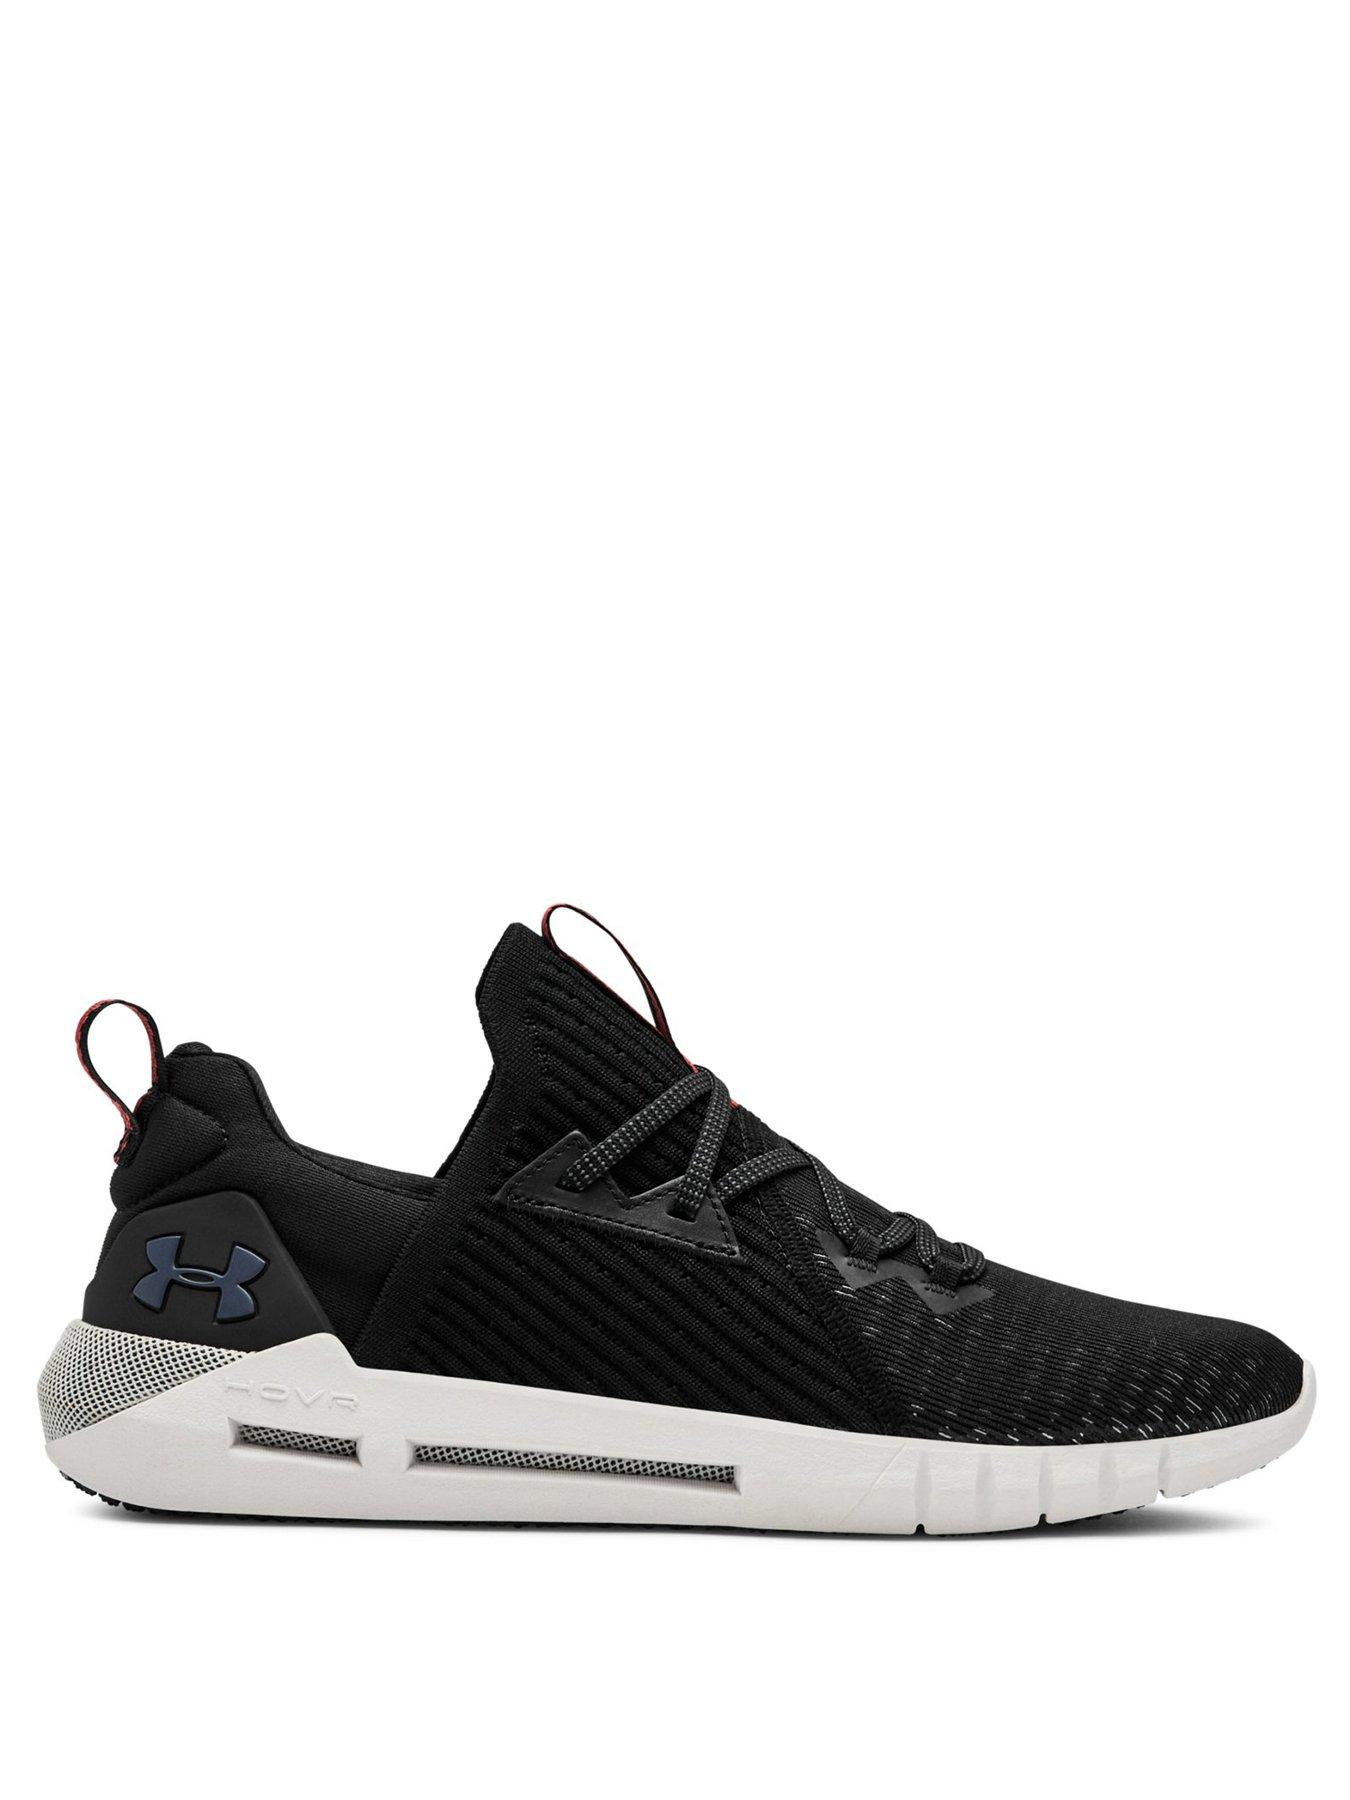 under armour hovr slk trainers